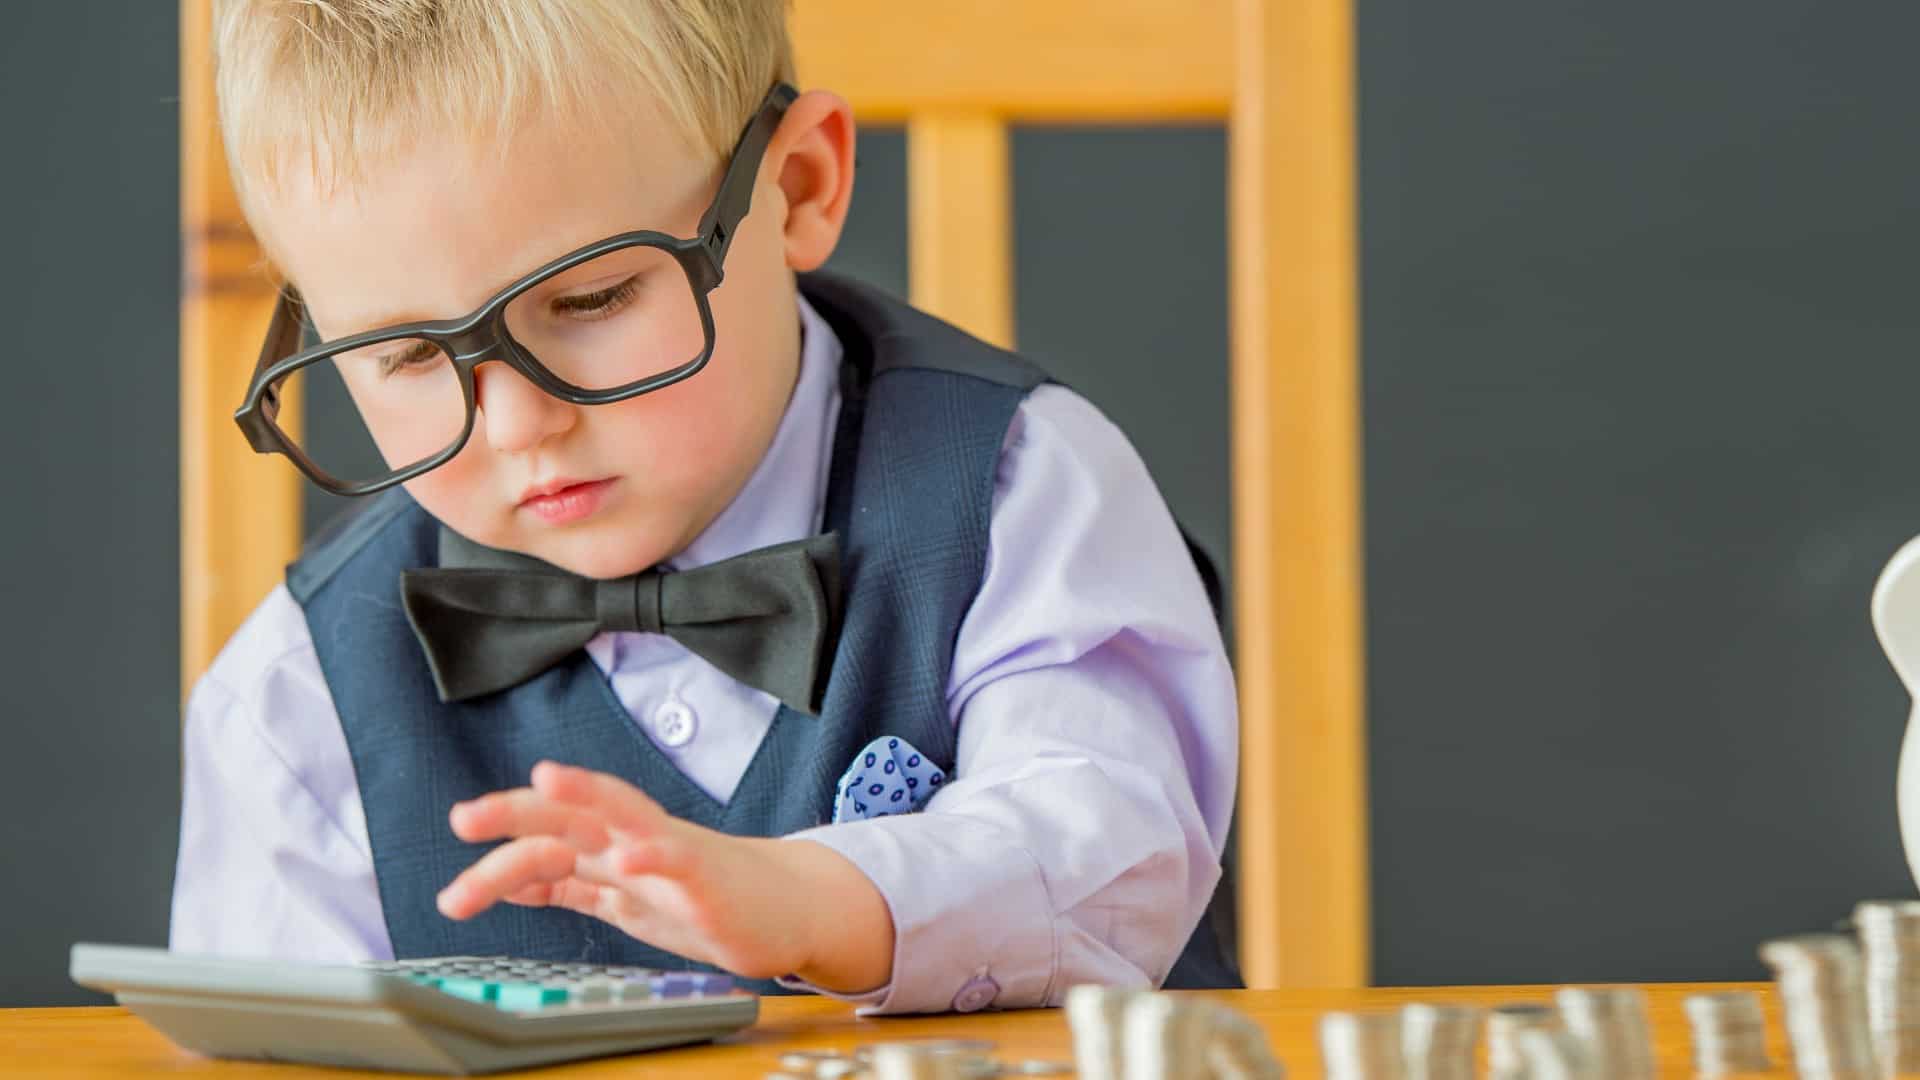 Young boy wearing suit and glasses adds up Westpac dividends paid since 2017 on his calculator